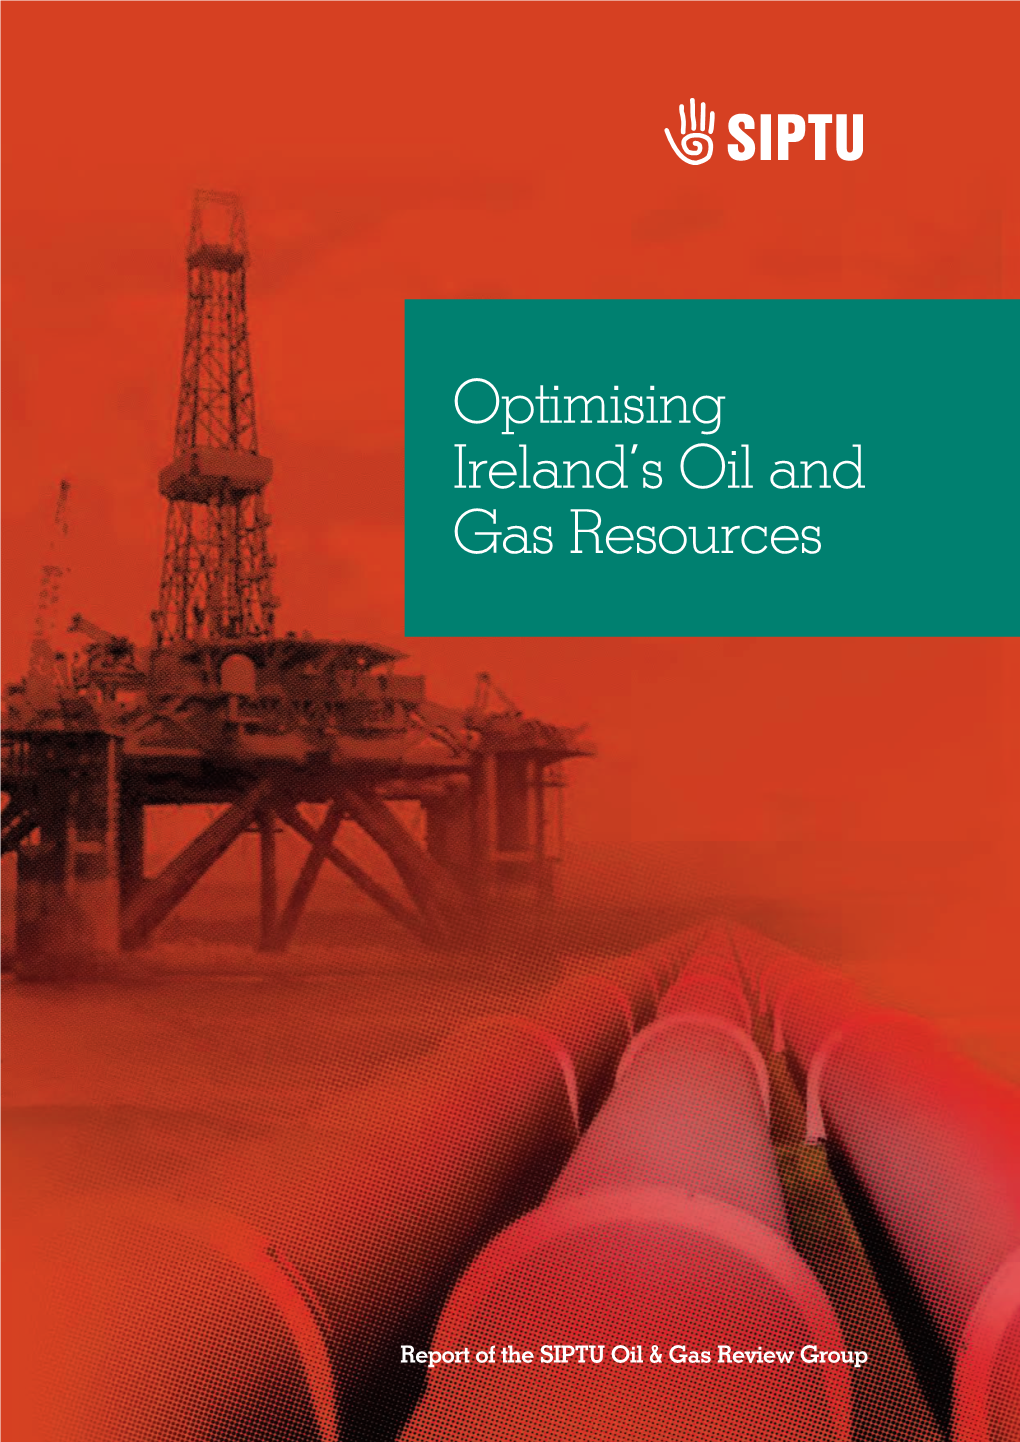 Optimising Ireland's Oil and Gas Resources